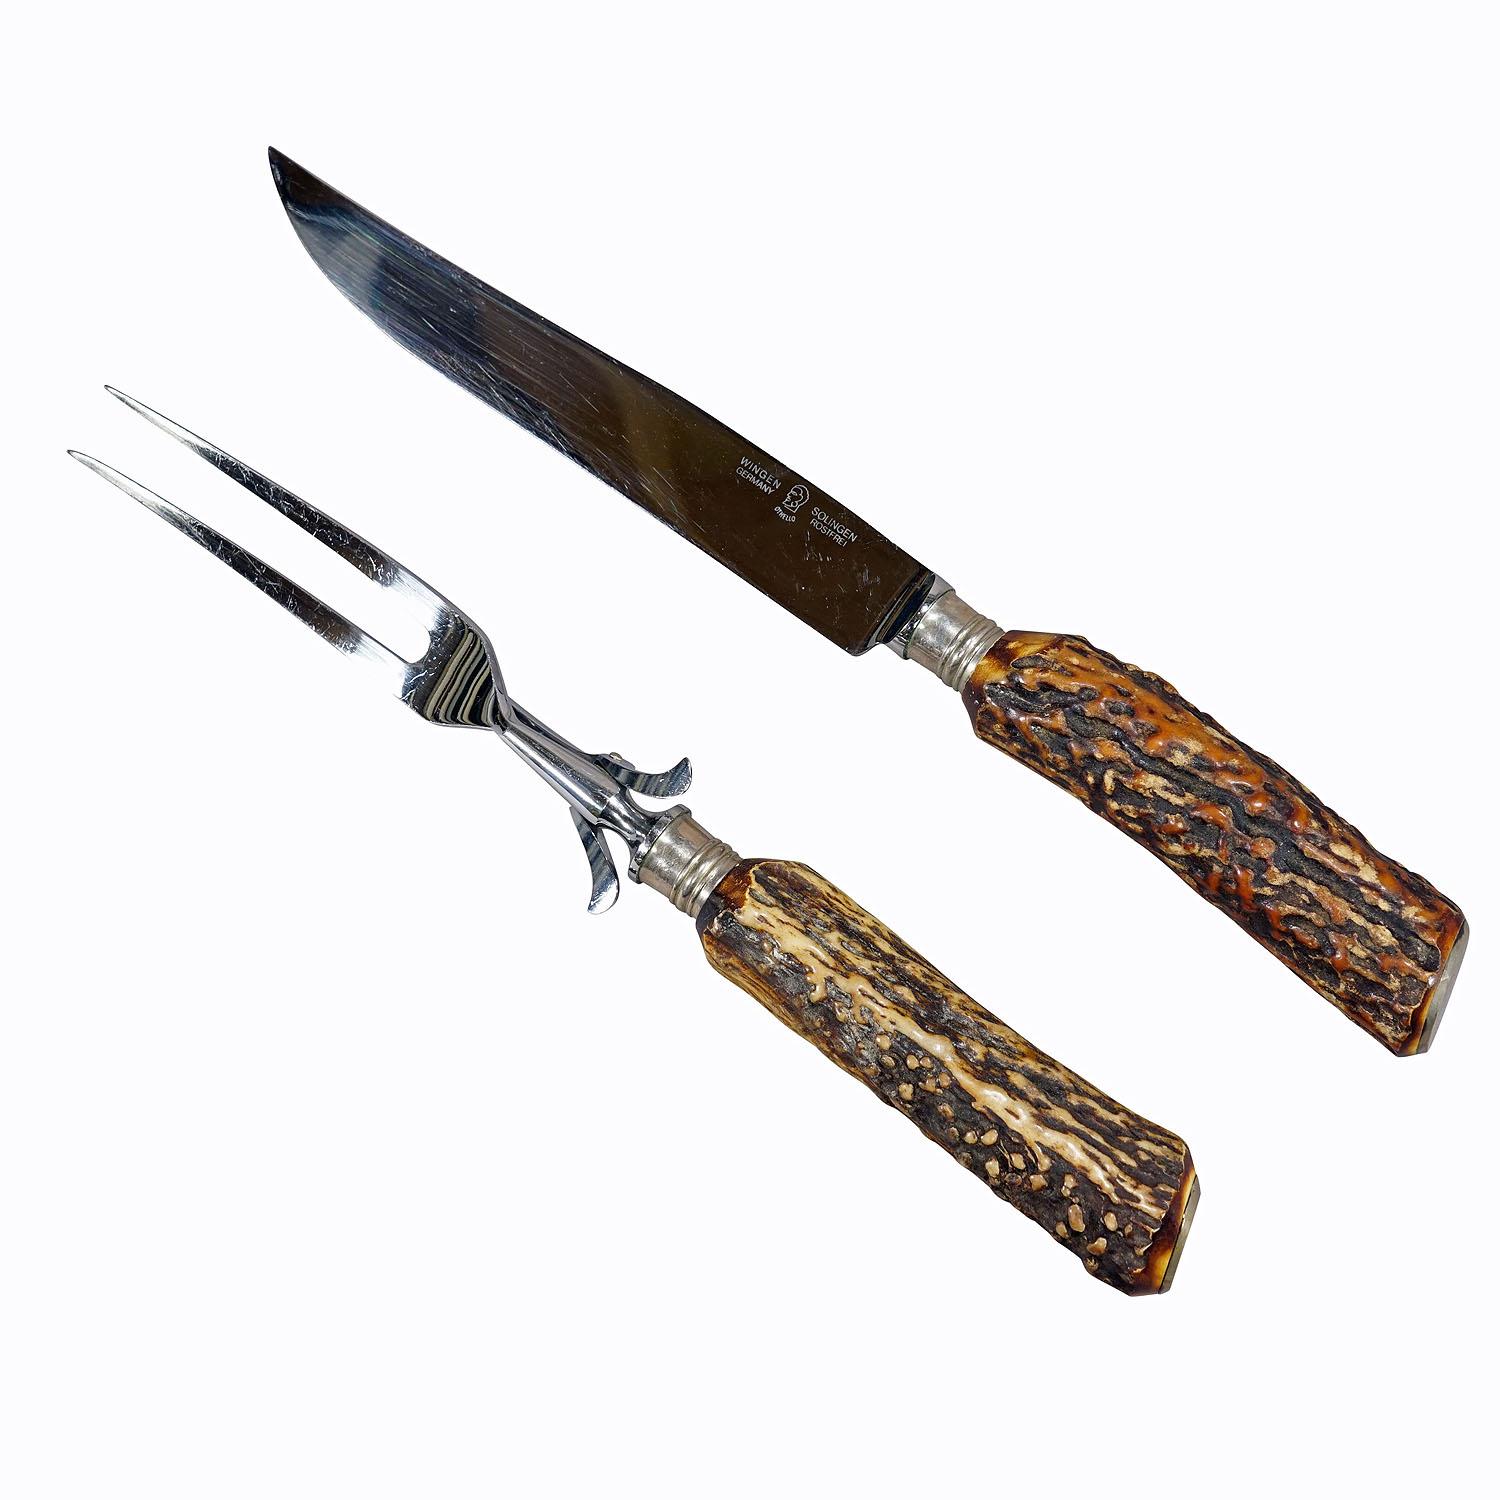 Vintage Stag Horn Carving Set by Anton Wingen, Solingen

A rustic carving set consisting of fork and knife. The handles are made of genuine stag horn and feature a silver knob on their ends. Blade and fork made of stainles steel. Manufactured by